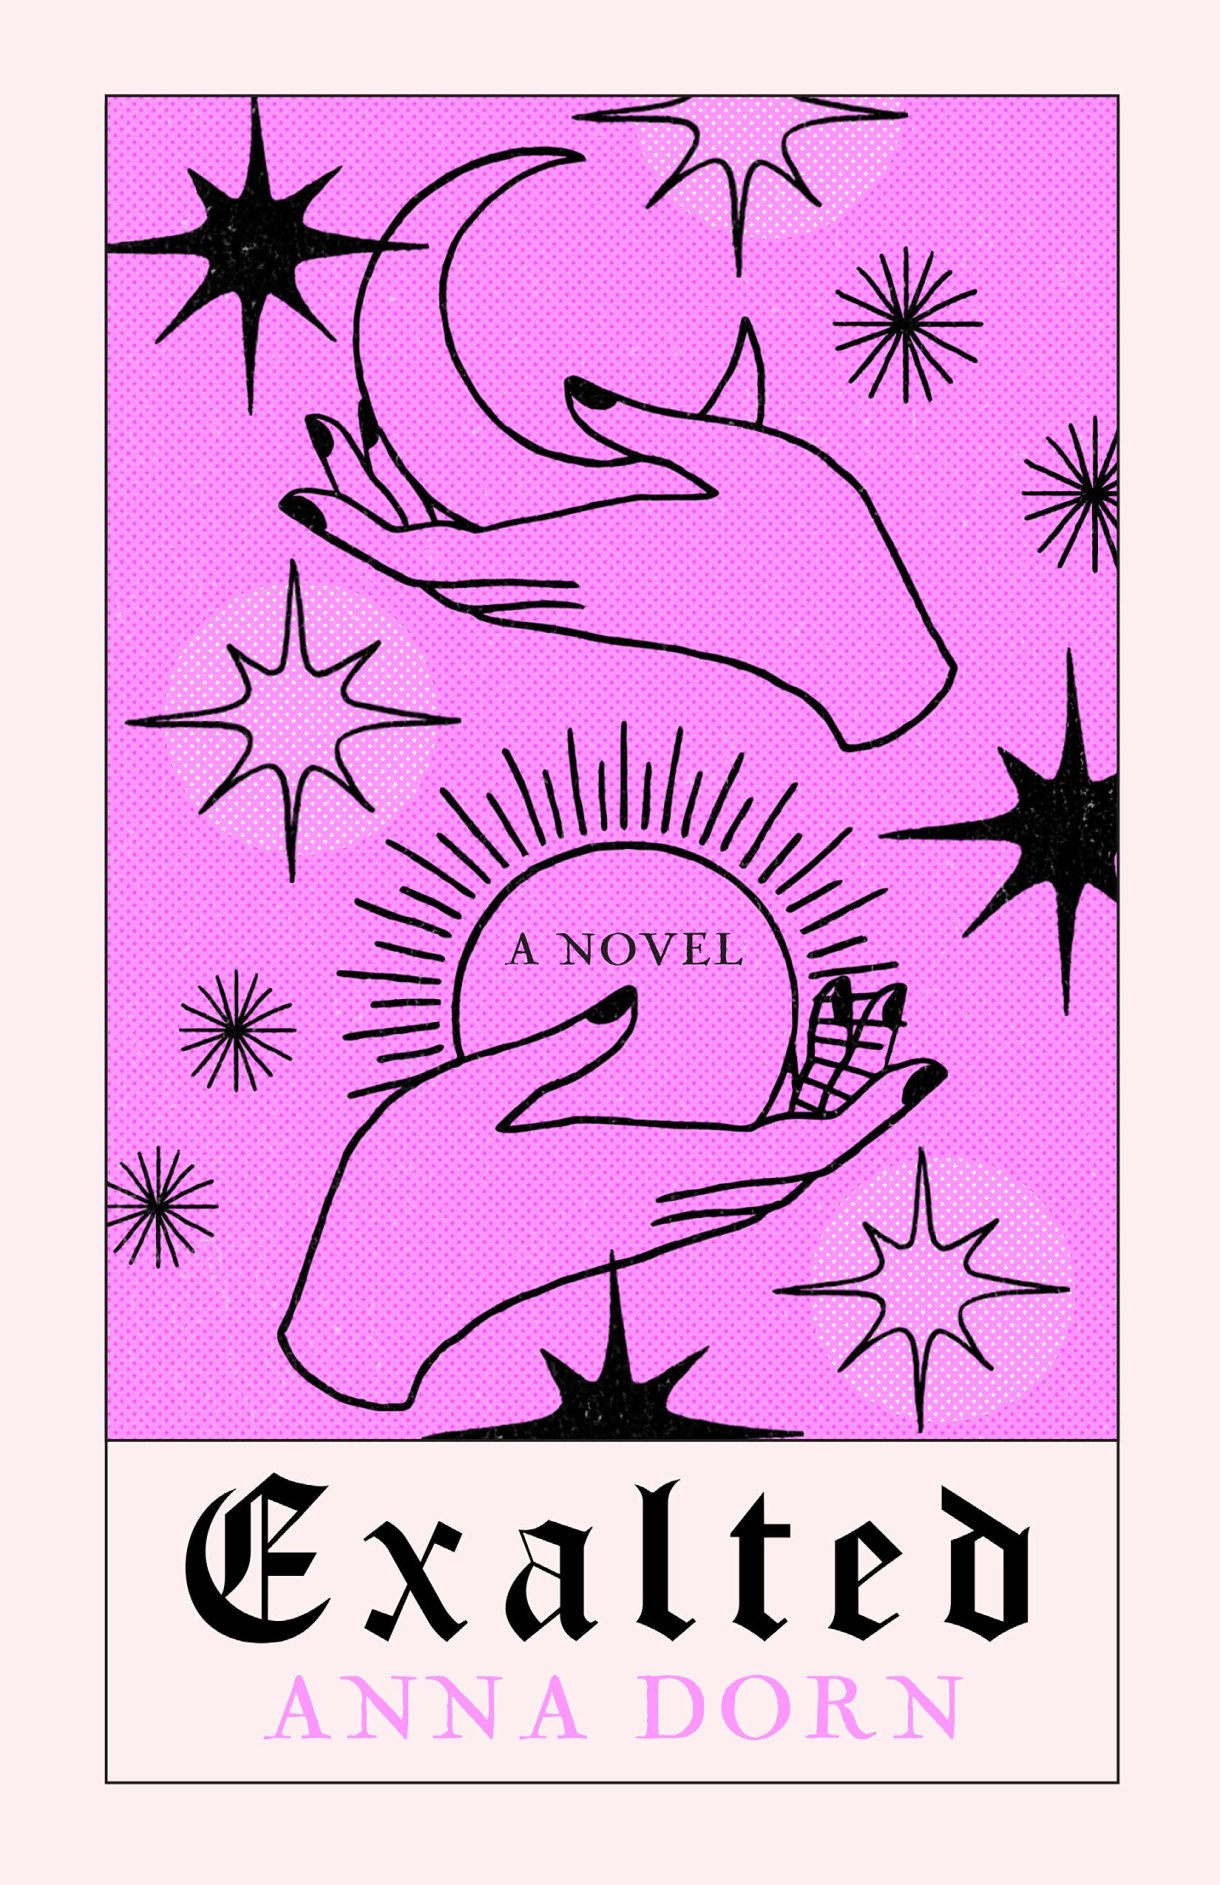 the cover of Exalted: a novel, with some witchy looking illustrated hands on the cover holding a star and a moon